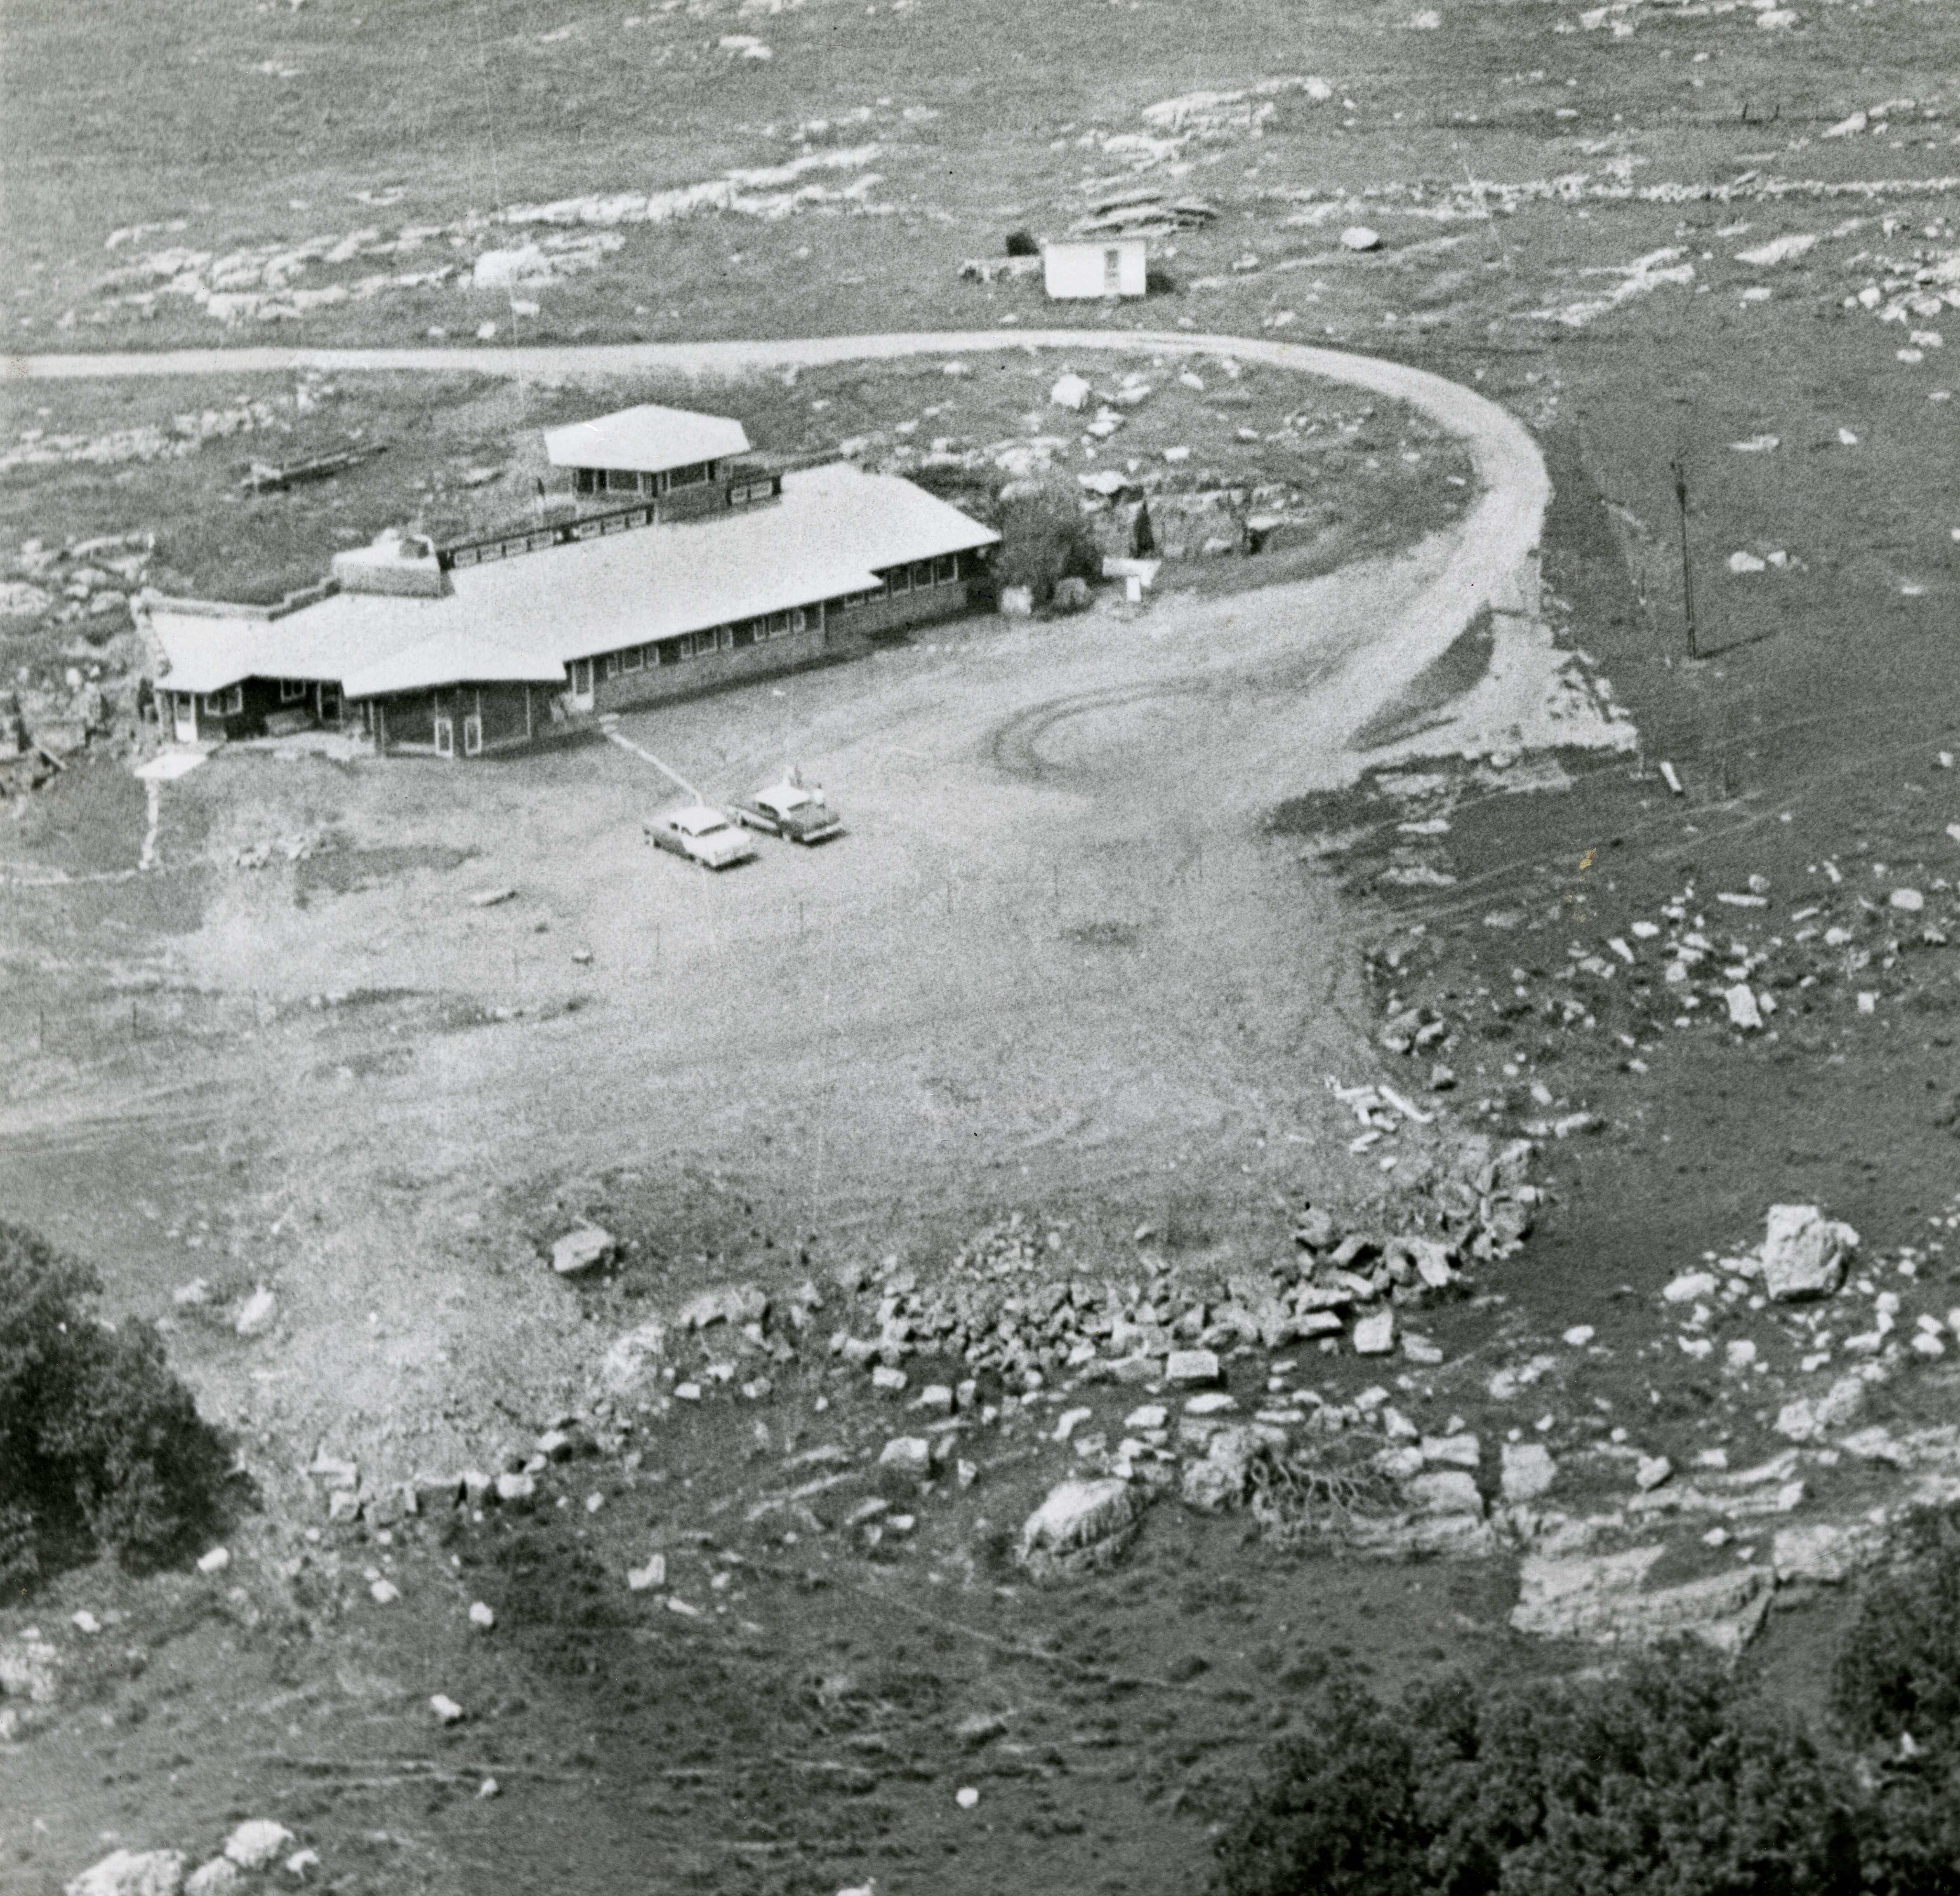 An aerial view of the house. The building in the upper right is Manfred’s writing shed, which was moved to this location from Bloomington, Minnesota prior to the house being built.